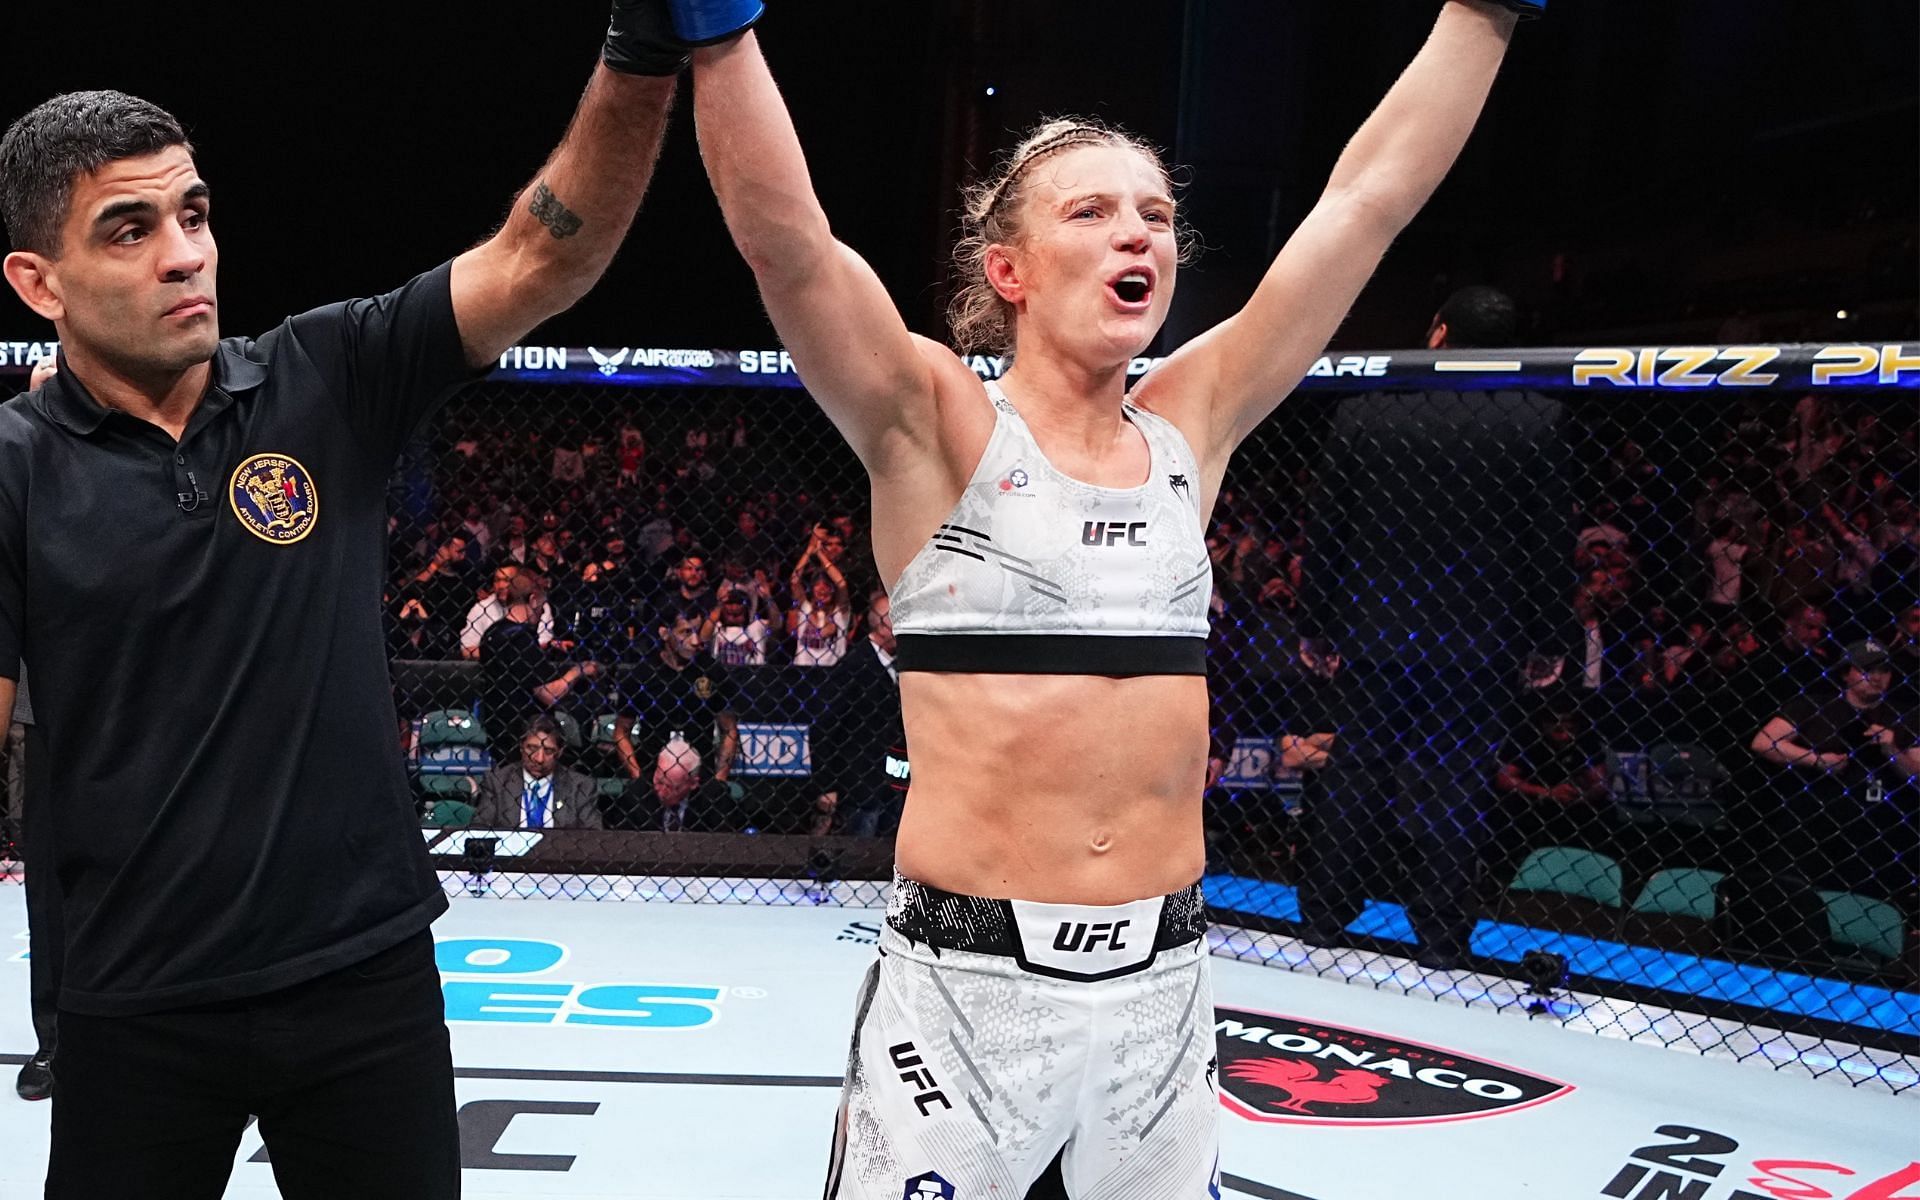 Did Manon Fiorot cement a UFC title shot with her win last night?